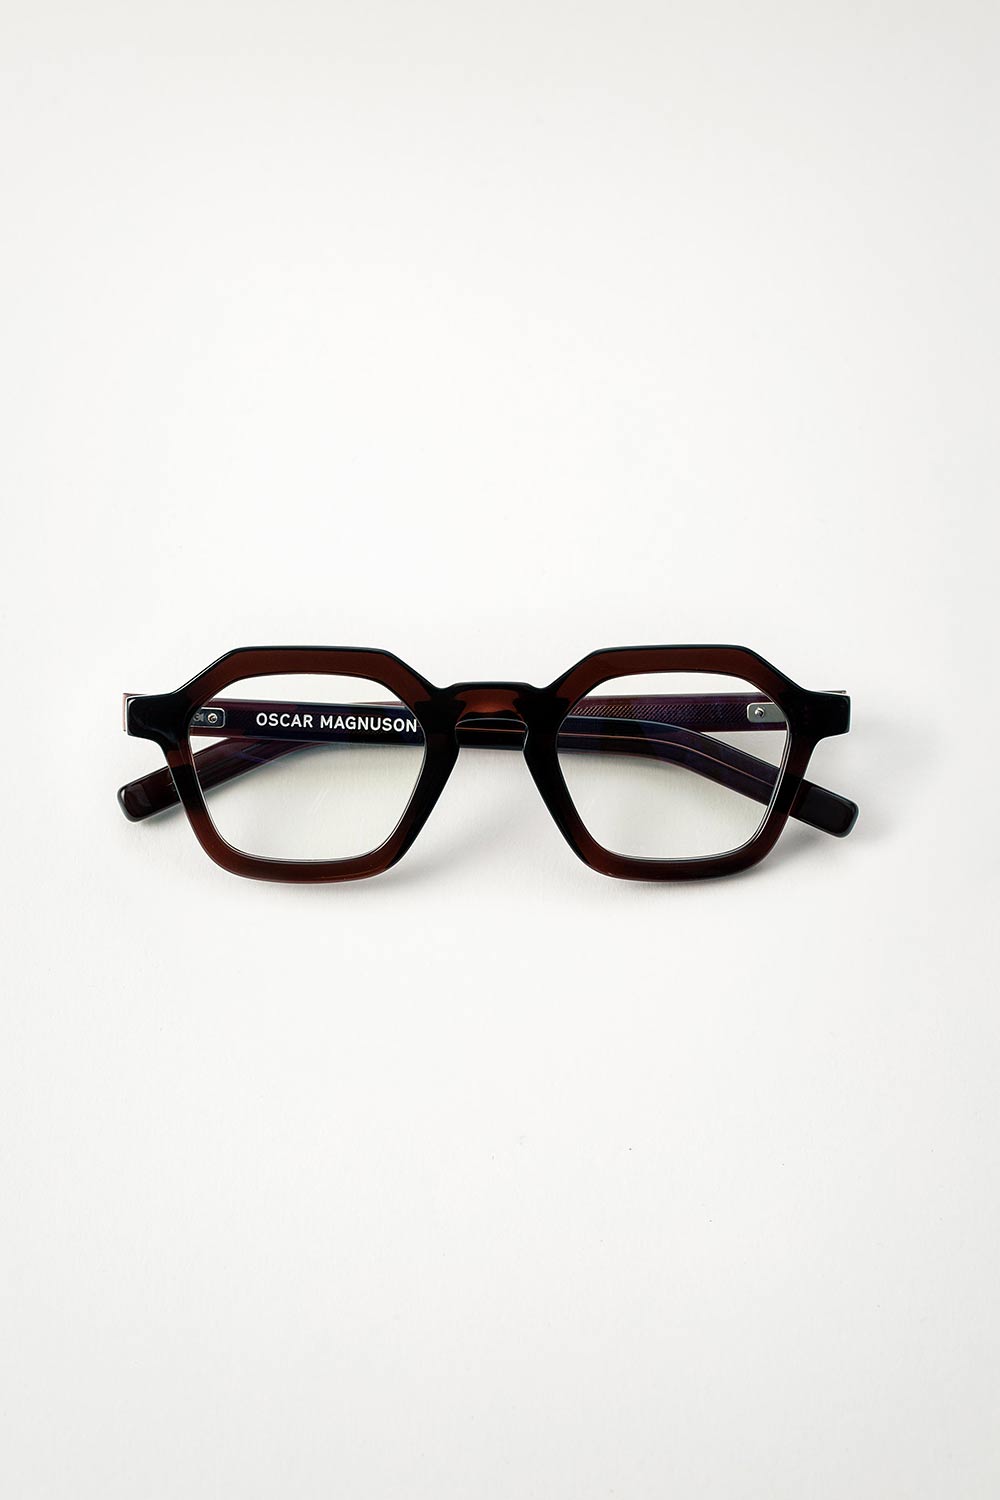 Products – Oscar Magnuson Spectacles